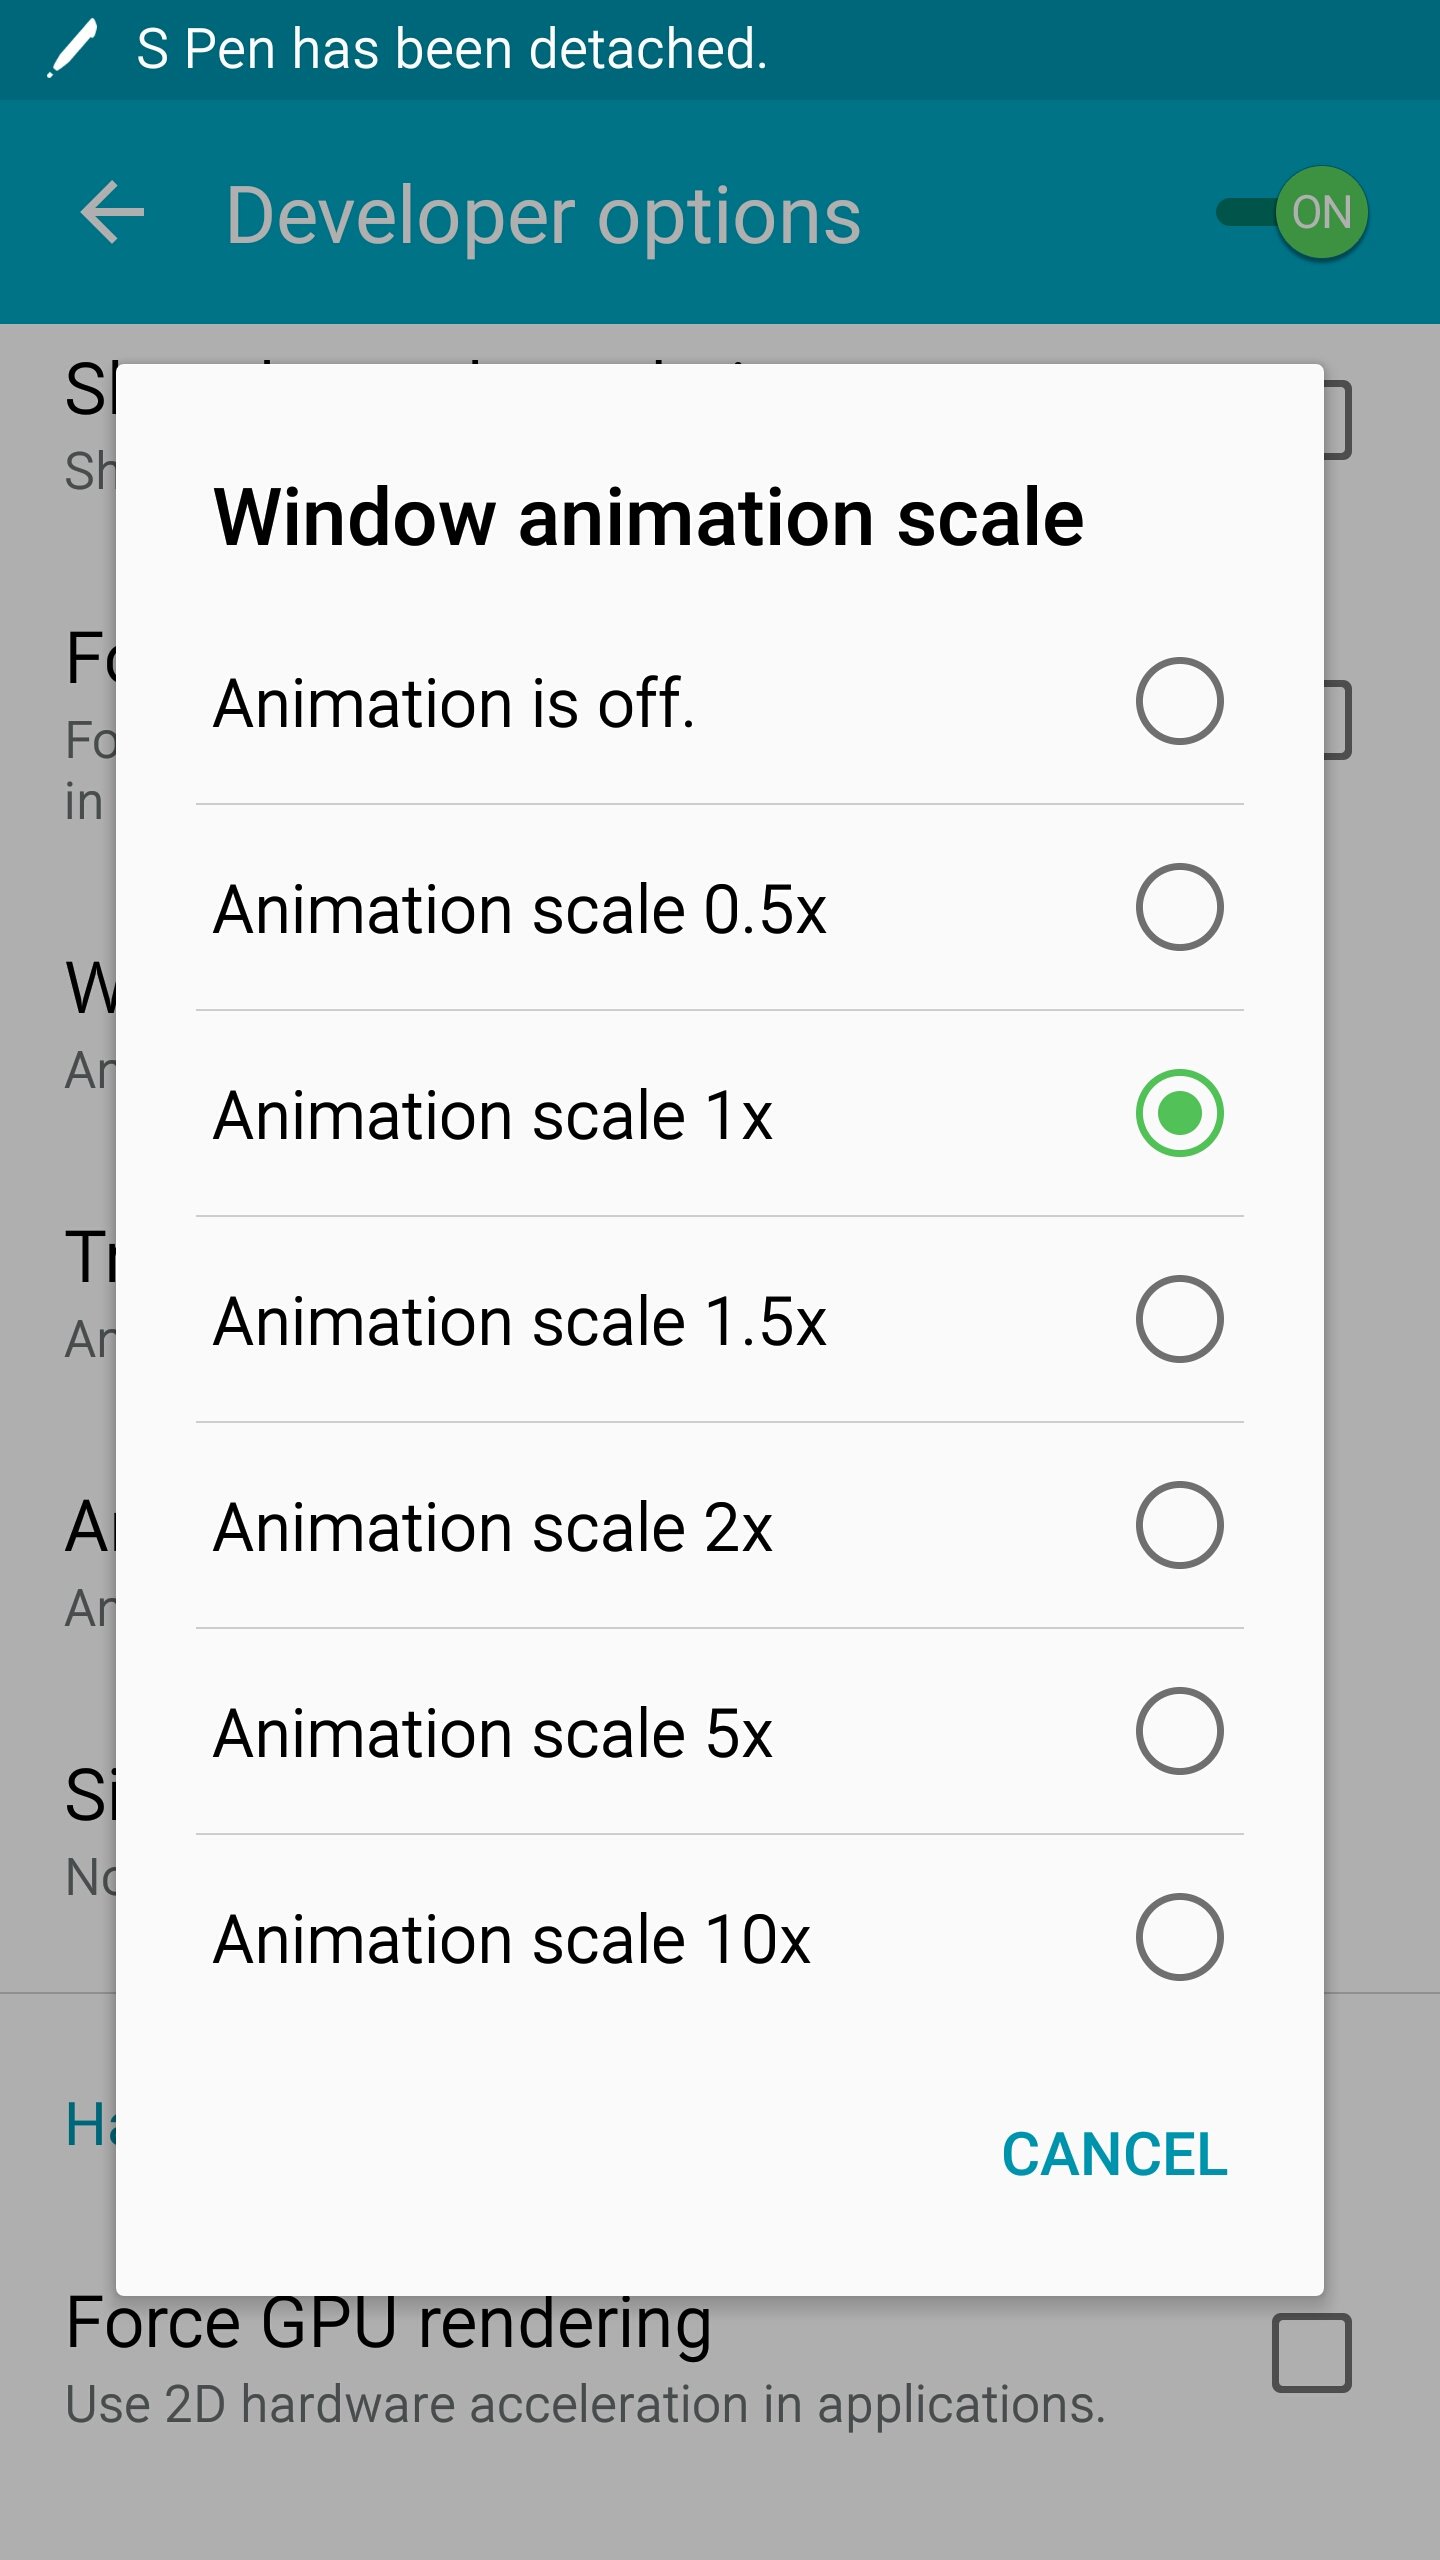 window anaimation scale options on samsung galaxy note 4